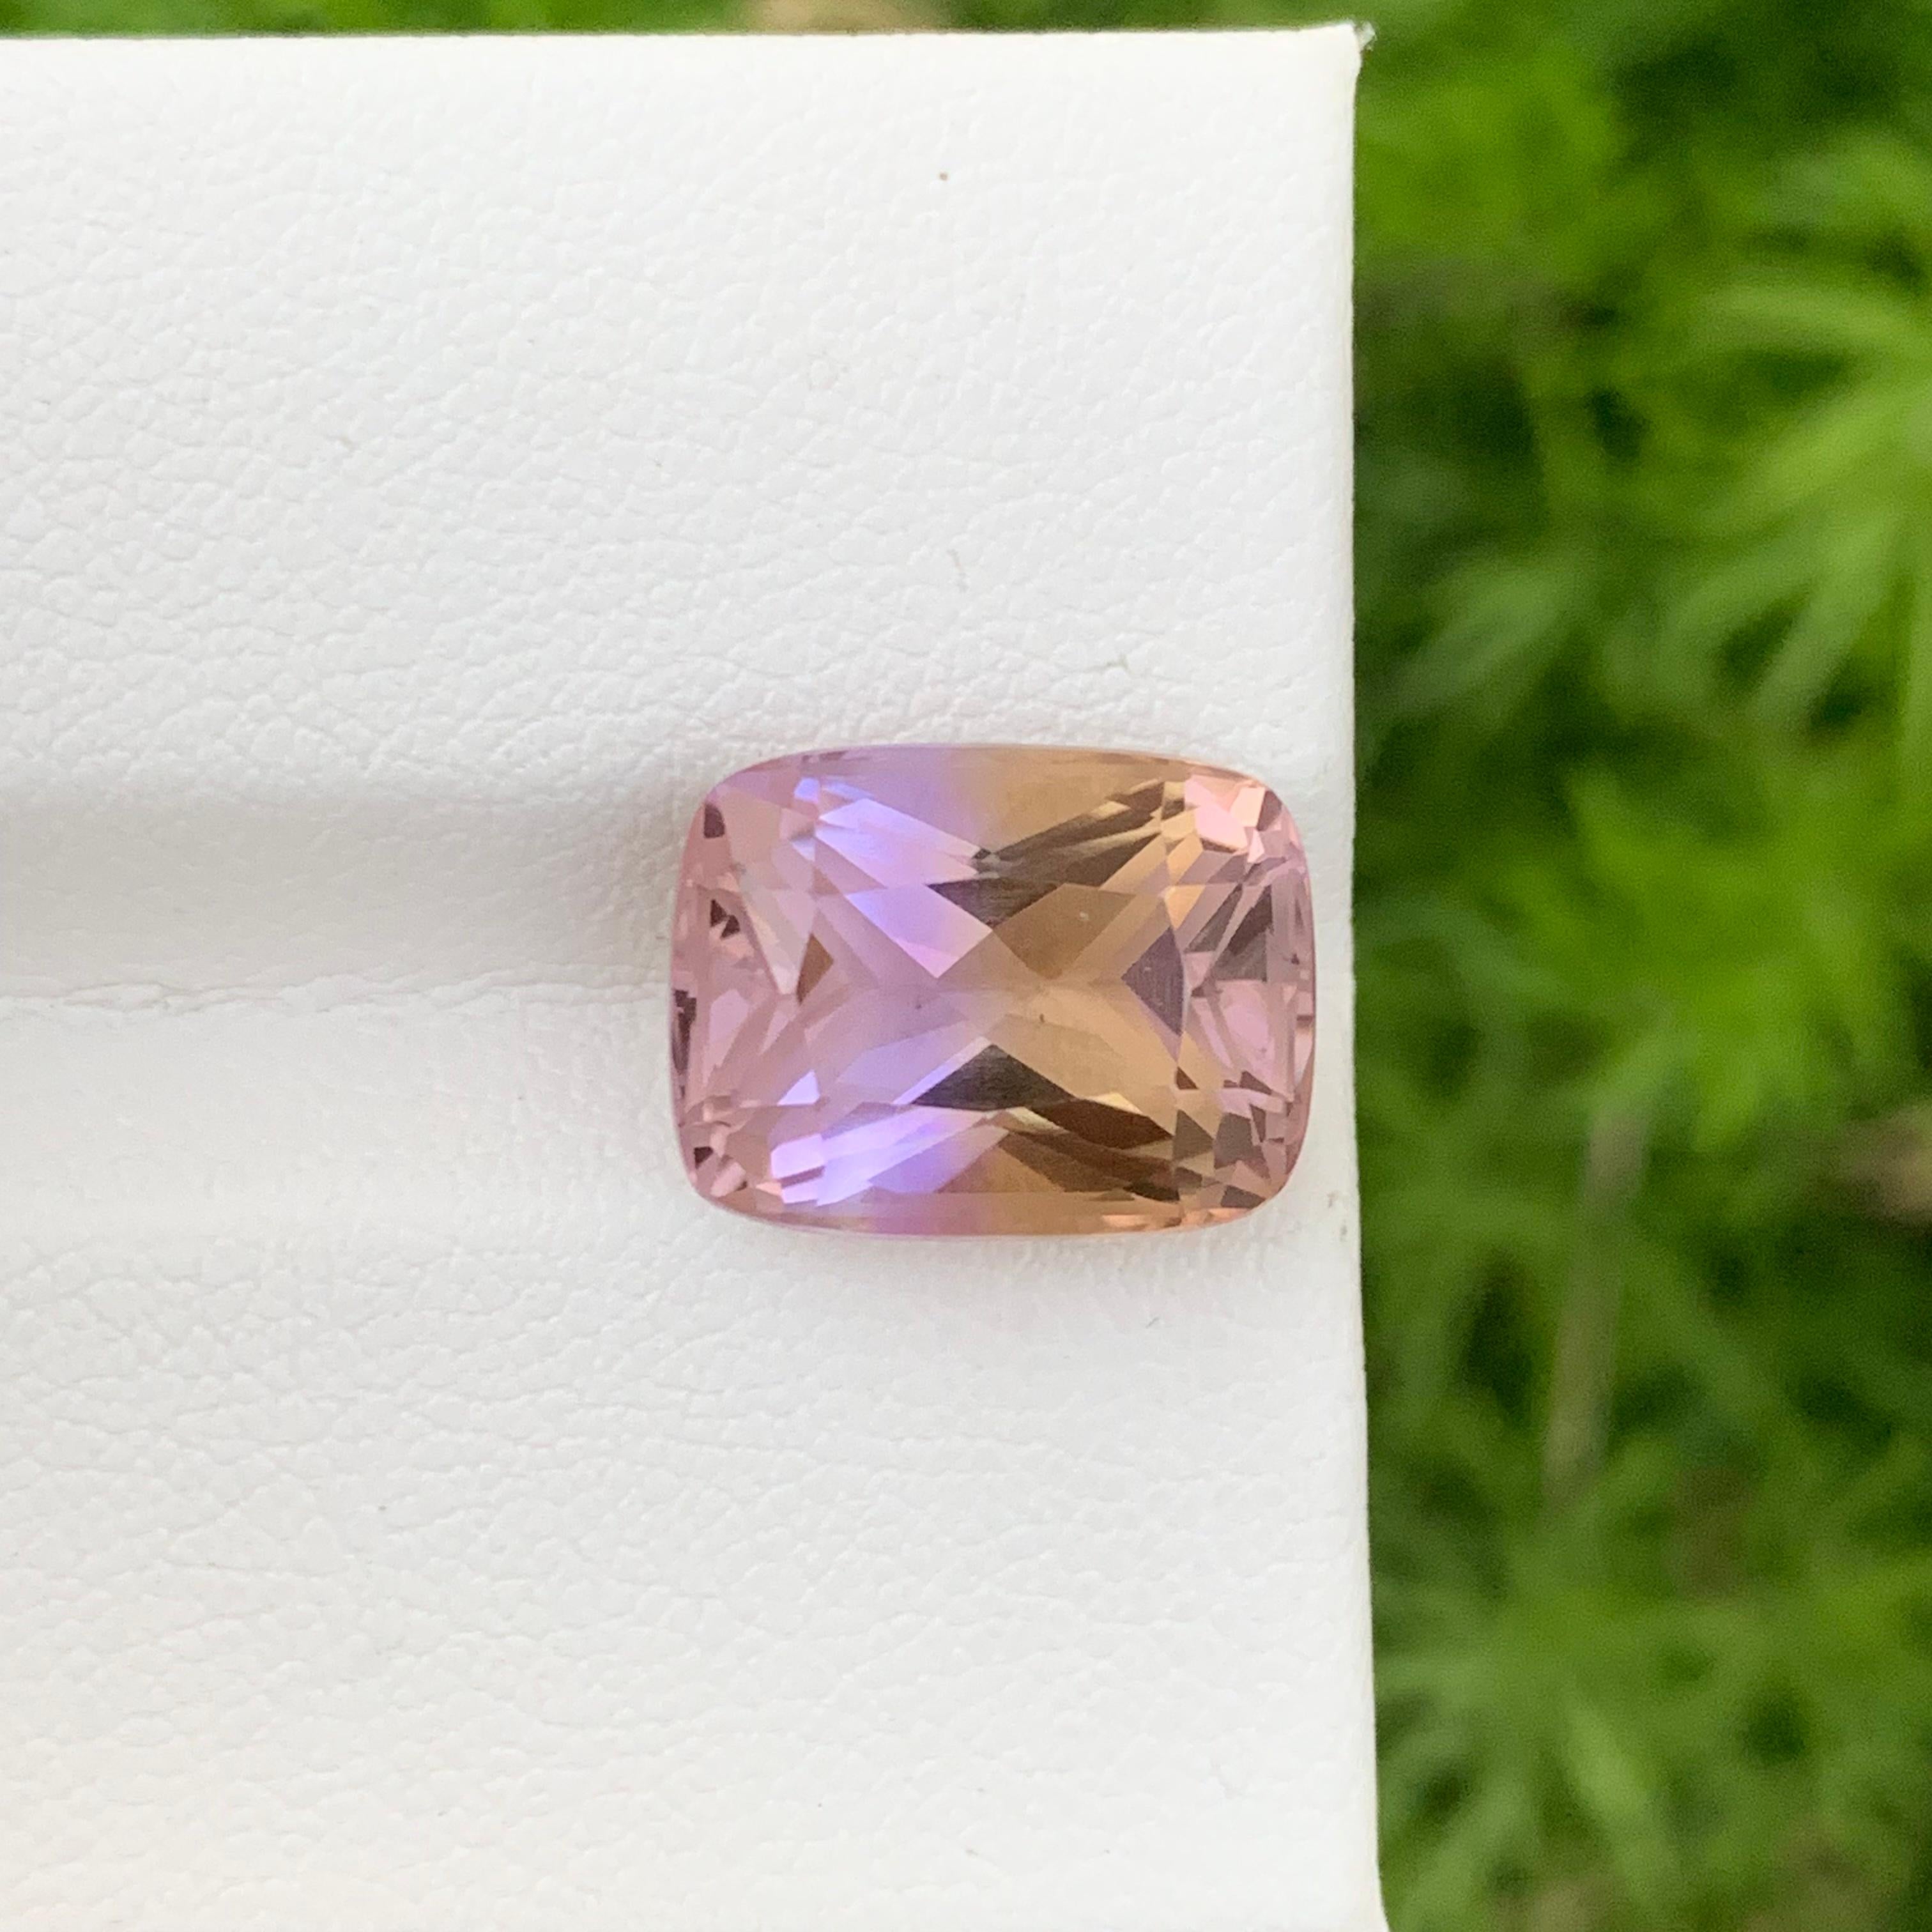 Faceted Ametrine 
Weight: 8.20 Carats 
Dimension: 13.7x10.5x8.5 Mm
Origin: Brazil
Color: Purple & Yellow 
Shape: Cushion
Certificate: On Customer Demand 
Ametrine is a captivating gemstone known for its striking combination of amethyst and citrine.